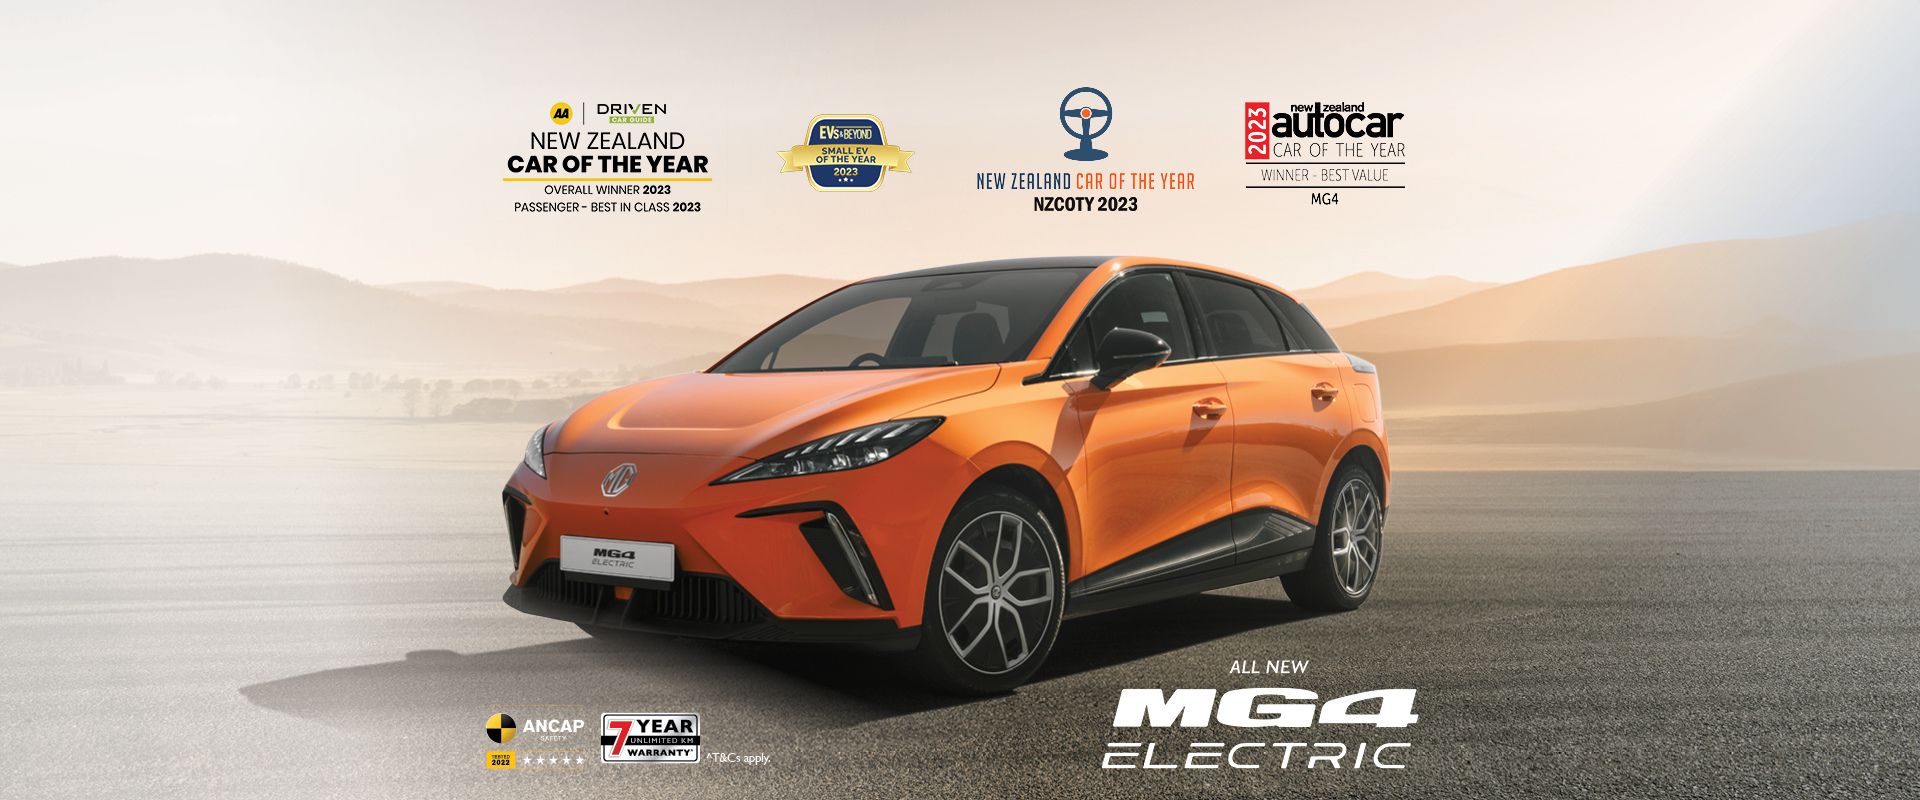 All new MG4 Electric. 2023 New Zealand Car of the Year, 2023 AA Driven Car of the Year, EVs & Beyond Small EV of the Year 2023